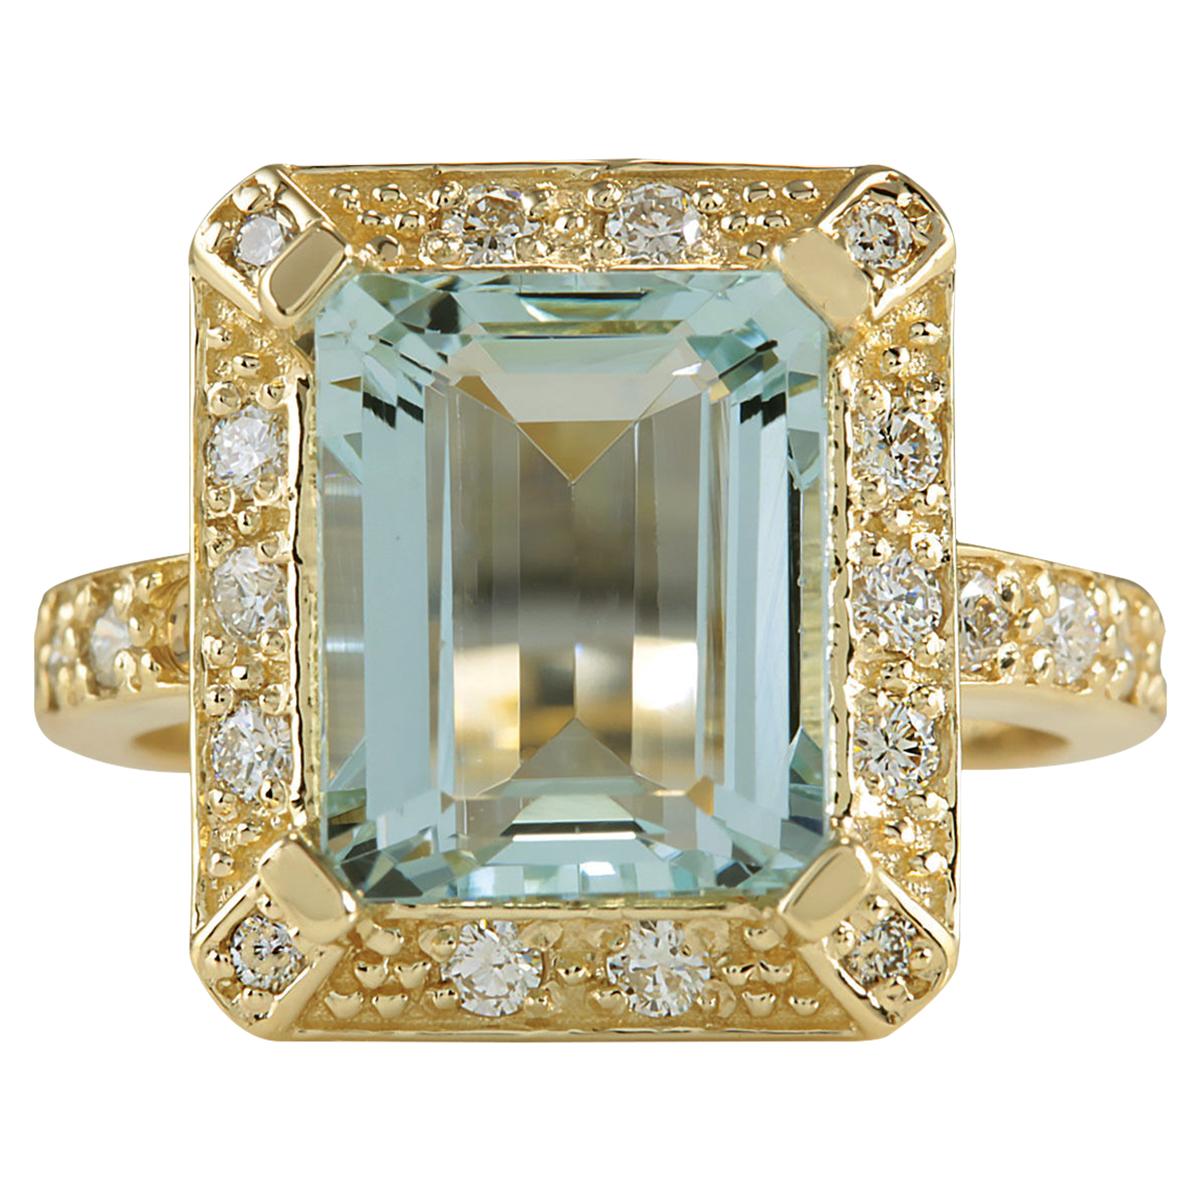 Introducing a breathtaking masterpiece of timeless beauty - the 4.85 Carat Natural Aquamarine 14 Karat Yellow Gold Diamond Ring. This ring is a symbol of luxury and sophistication.

Crafted to perfection in 14K yellow gold, this ring boasts a total